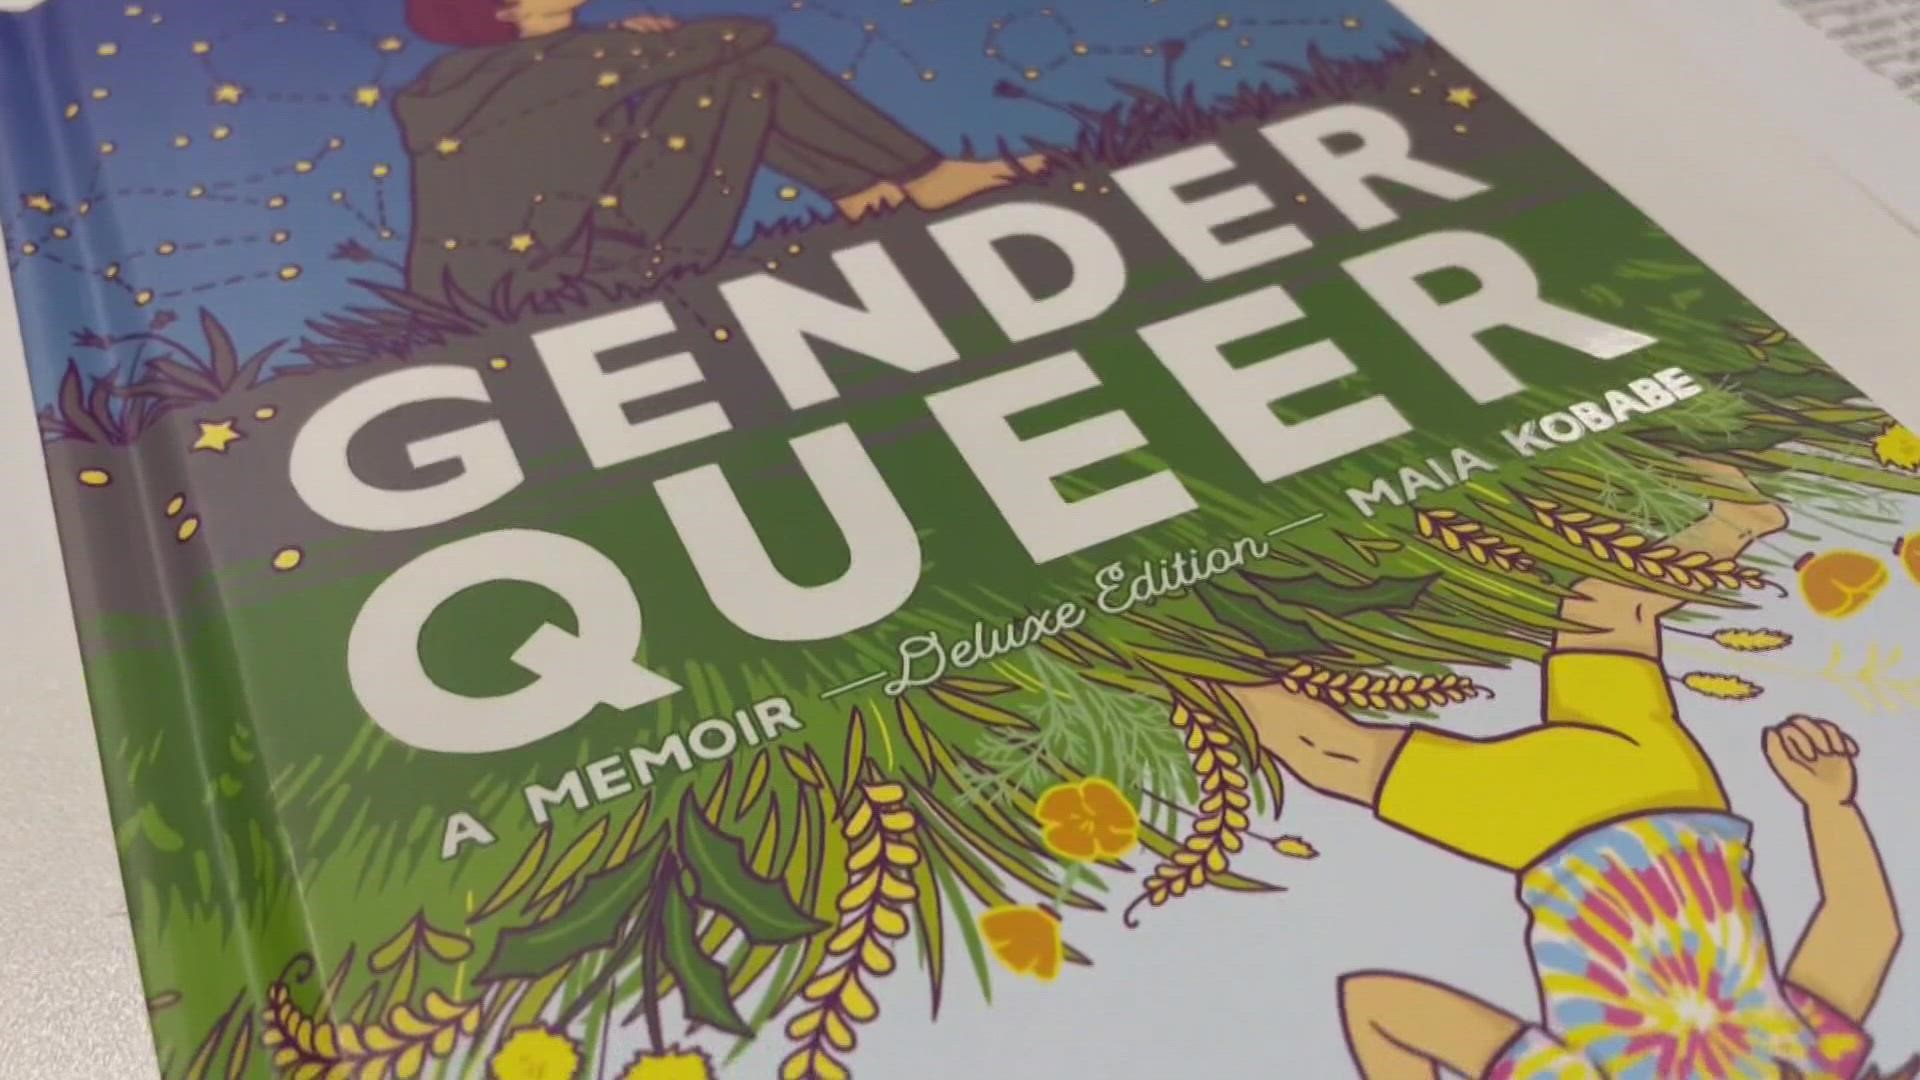 "Gender Queer: A Memoir" is a story of a nonbinary person finding identity. Some MSAD 6 community members say the book is inappropriate for children.